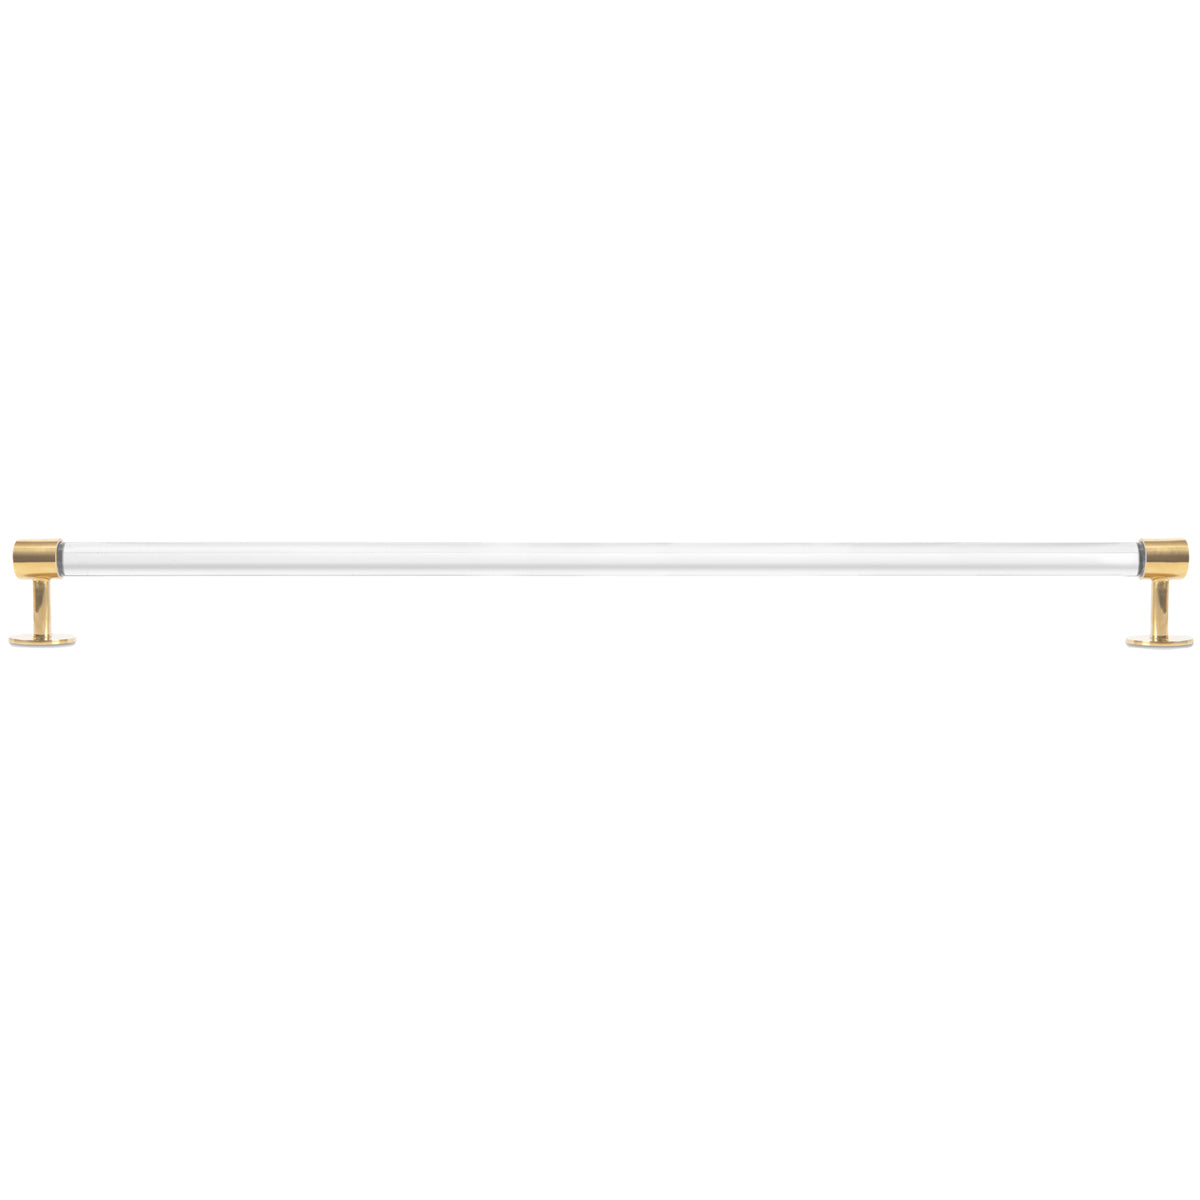 Round curtain rod with polished brass ends and a clear Lucite rod.